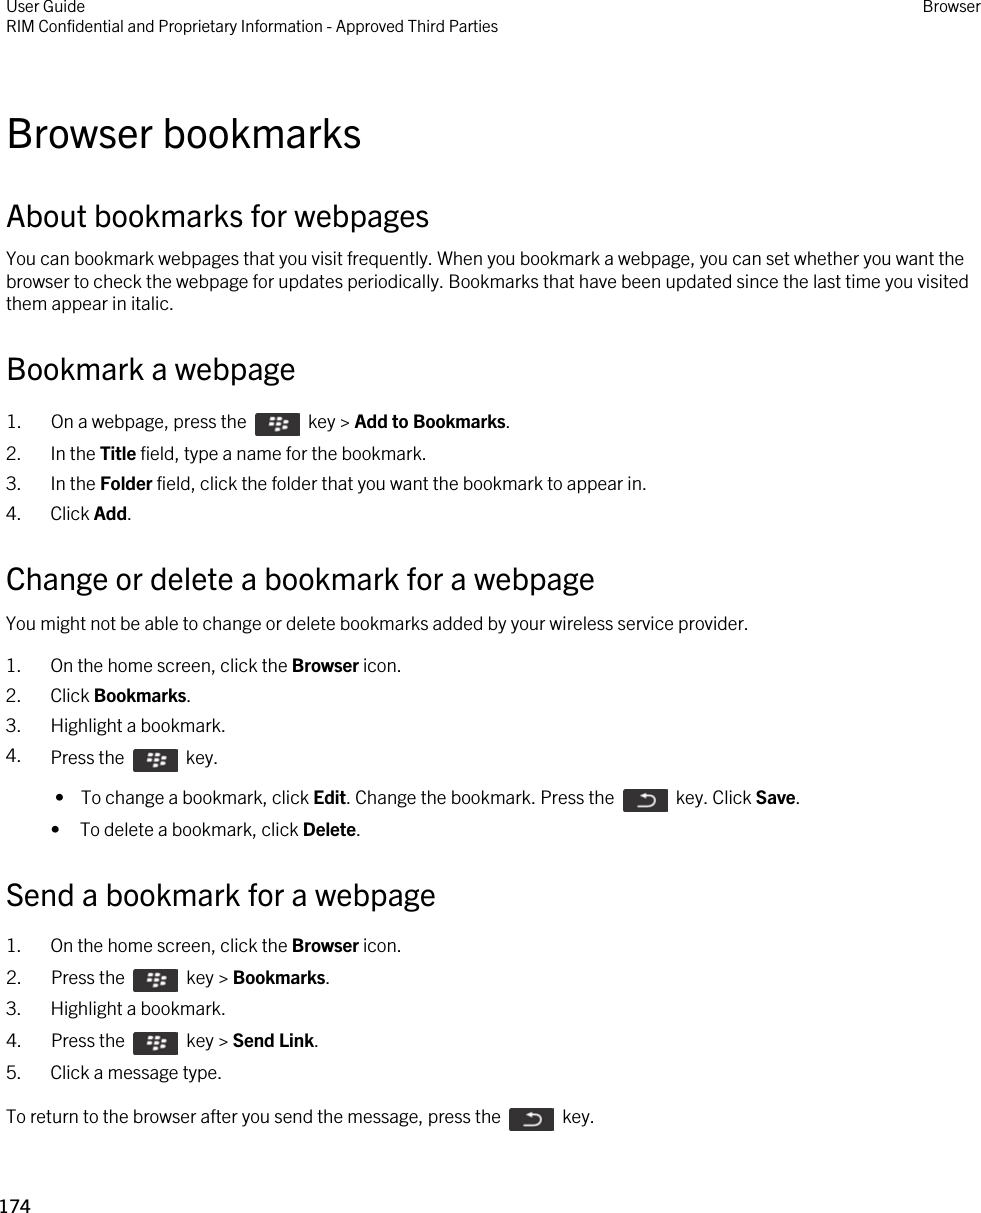 Browser bookmarksAbout bookmarks for webpagesYou can bookmark webpages that you visit frequently. When you bookmark a webpage, you can set whether you want the browser to check the webpage for updates periodically. Bookmarks that have been updated since the last time you visited them appear in italic.Bookmark a webpage1.  On a webpage, press the    key &gt; Add to Bookmarks.2. In the Title field, type a name for the bookmark.3. In the Folder field, click the folder that you want the bookmark to appear in.4. Click Add.Change or delete a bookmark for a webpageYou might not be able to change or delete bookmarks added by your wireless service provider.1. On the home screen, click the Browser icon.2. Click Bookmarks.3. Highlight a bookmark.4. Press the    key.  •  To change a bookmark, click Edit. Change the bookmark. Press the    key. Click Save.• To delete a bookmark, click Delete.Send a bookmark for a webpage1. On the home screen, click the Browser icon.2.  Press the    key &gt; Bookmarks. 3. Highlight a bookmark.4.  Press the    key &gt; Send Link.5. Click a message type.To return to the browser after you send the message, press the    key.User GuideRIM Confidential and Proprietary Information - Approved Third Parties Browser174 